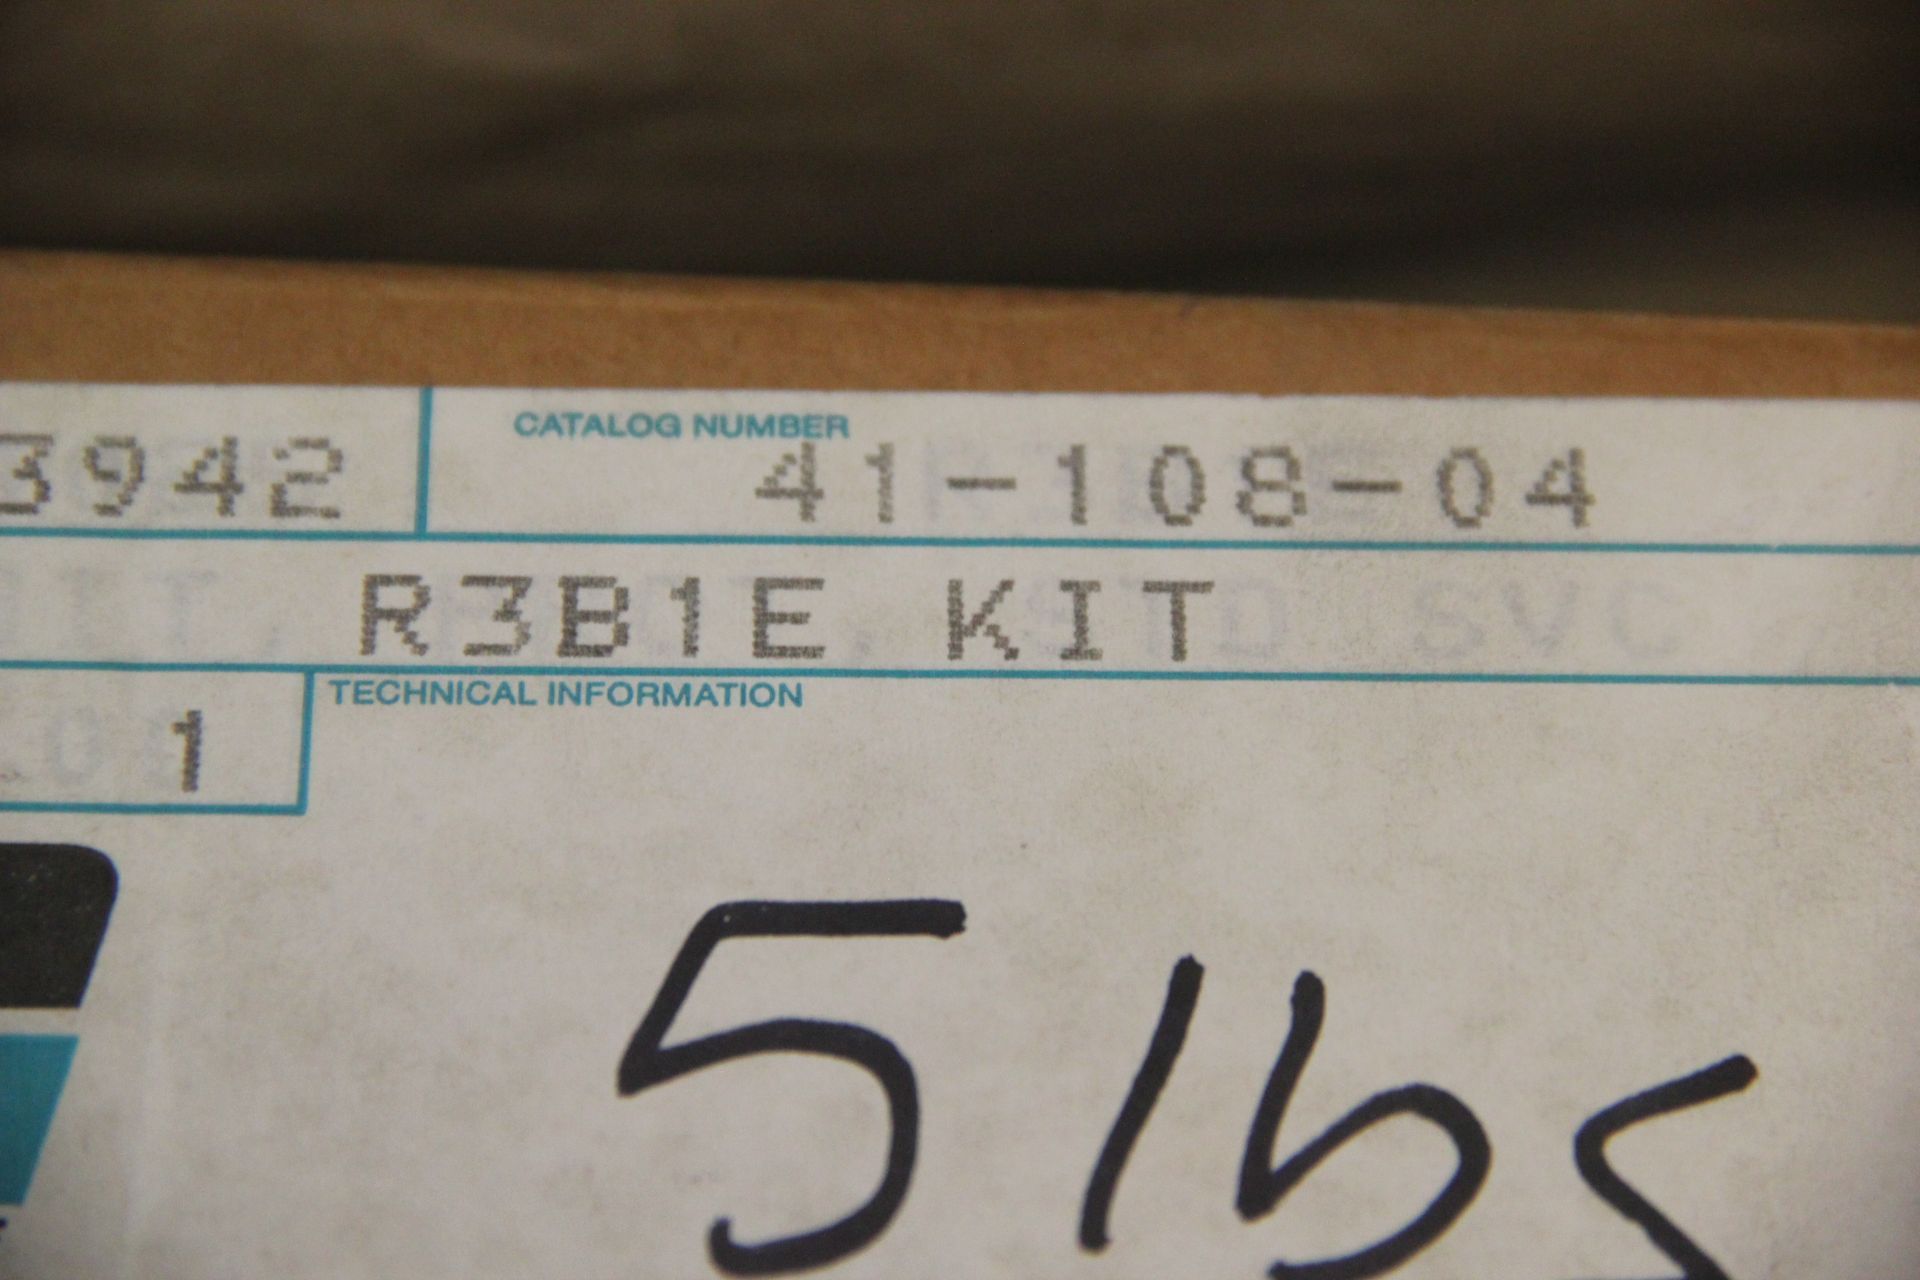 LOT OF NEW RELIANCE R3B1E PROTECTION MODULES - Image 3 of 4